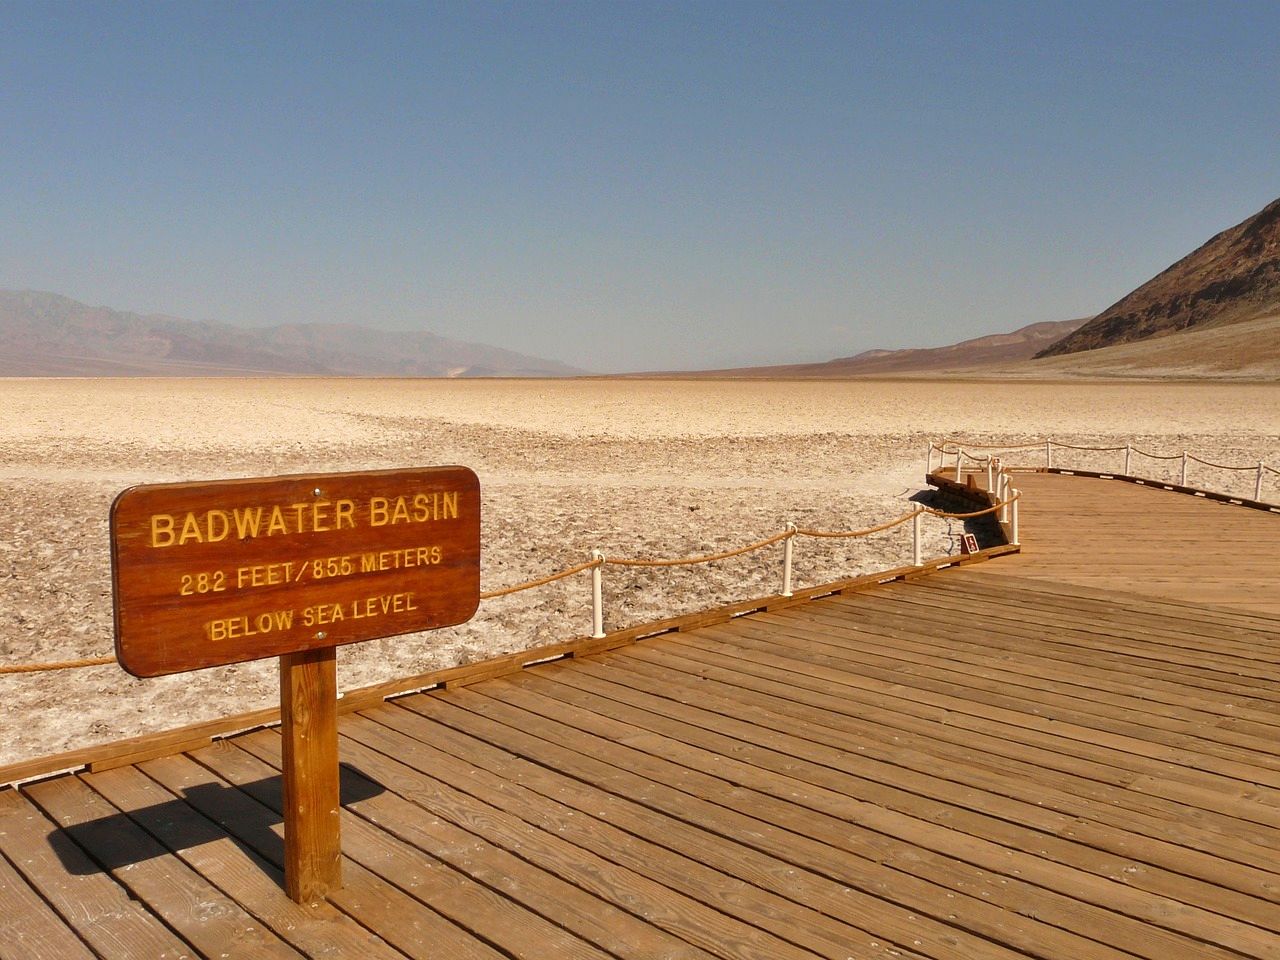 Badwater Basin features a temporary lake